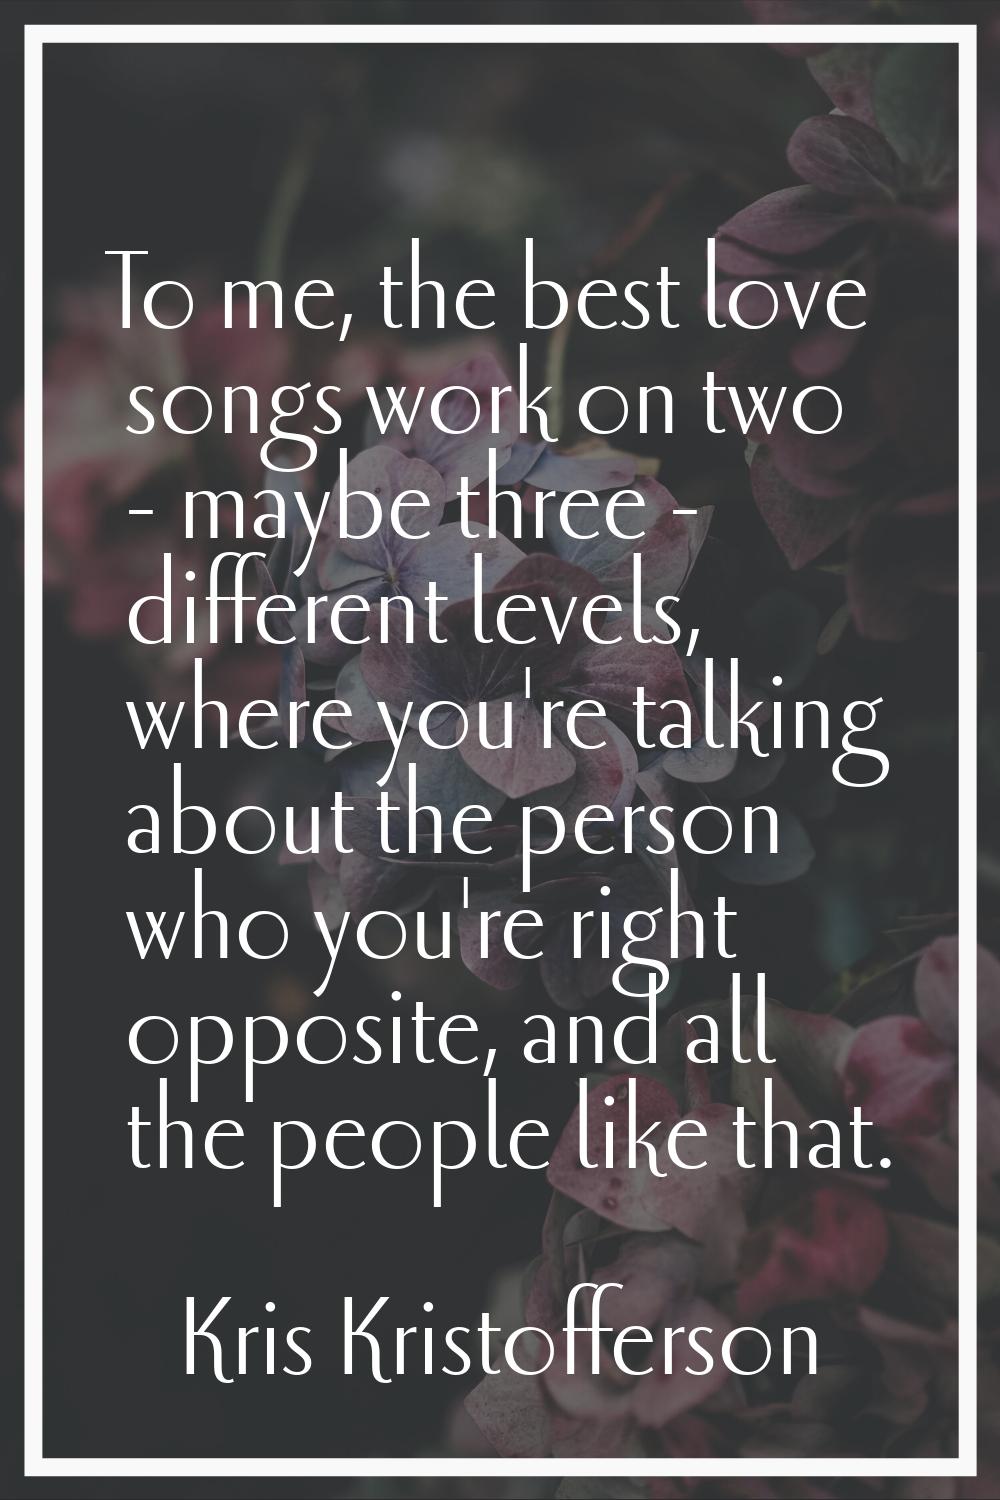 To me, the best love songs work on two - maybe three - different levels, where you're talking about